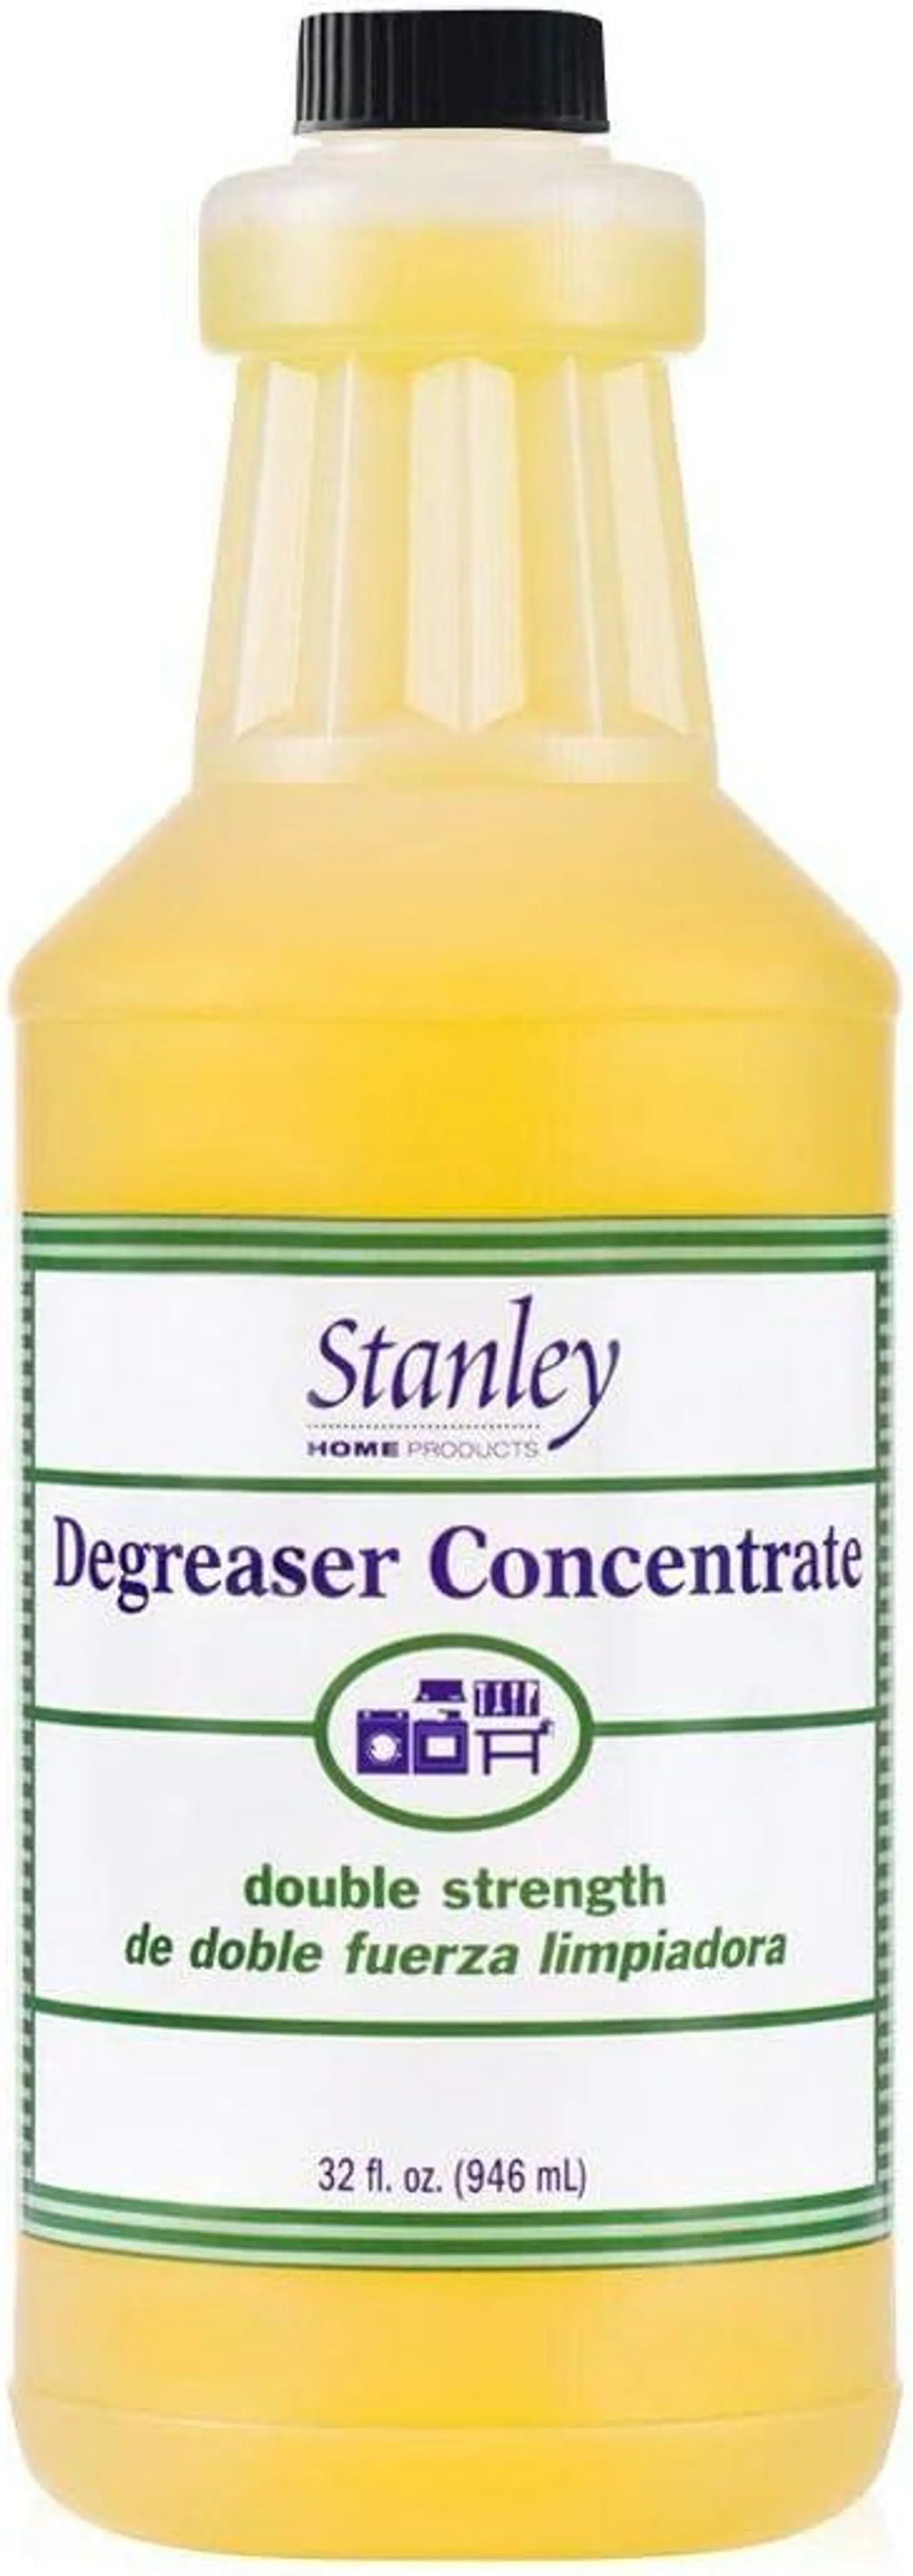 STANLEY HOME PRODUCTS Degreaser Concentrate - Makes 64 Gallons - Removes Stubborn Grease & Grime - Multipurpose Cleaner for Home & Commercial Use…